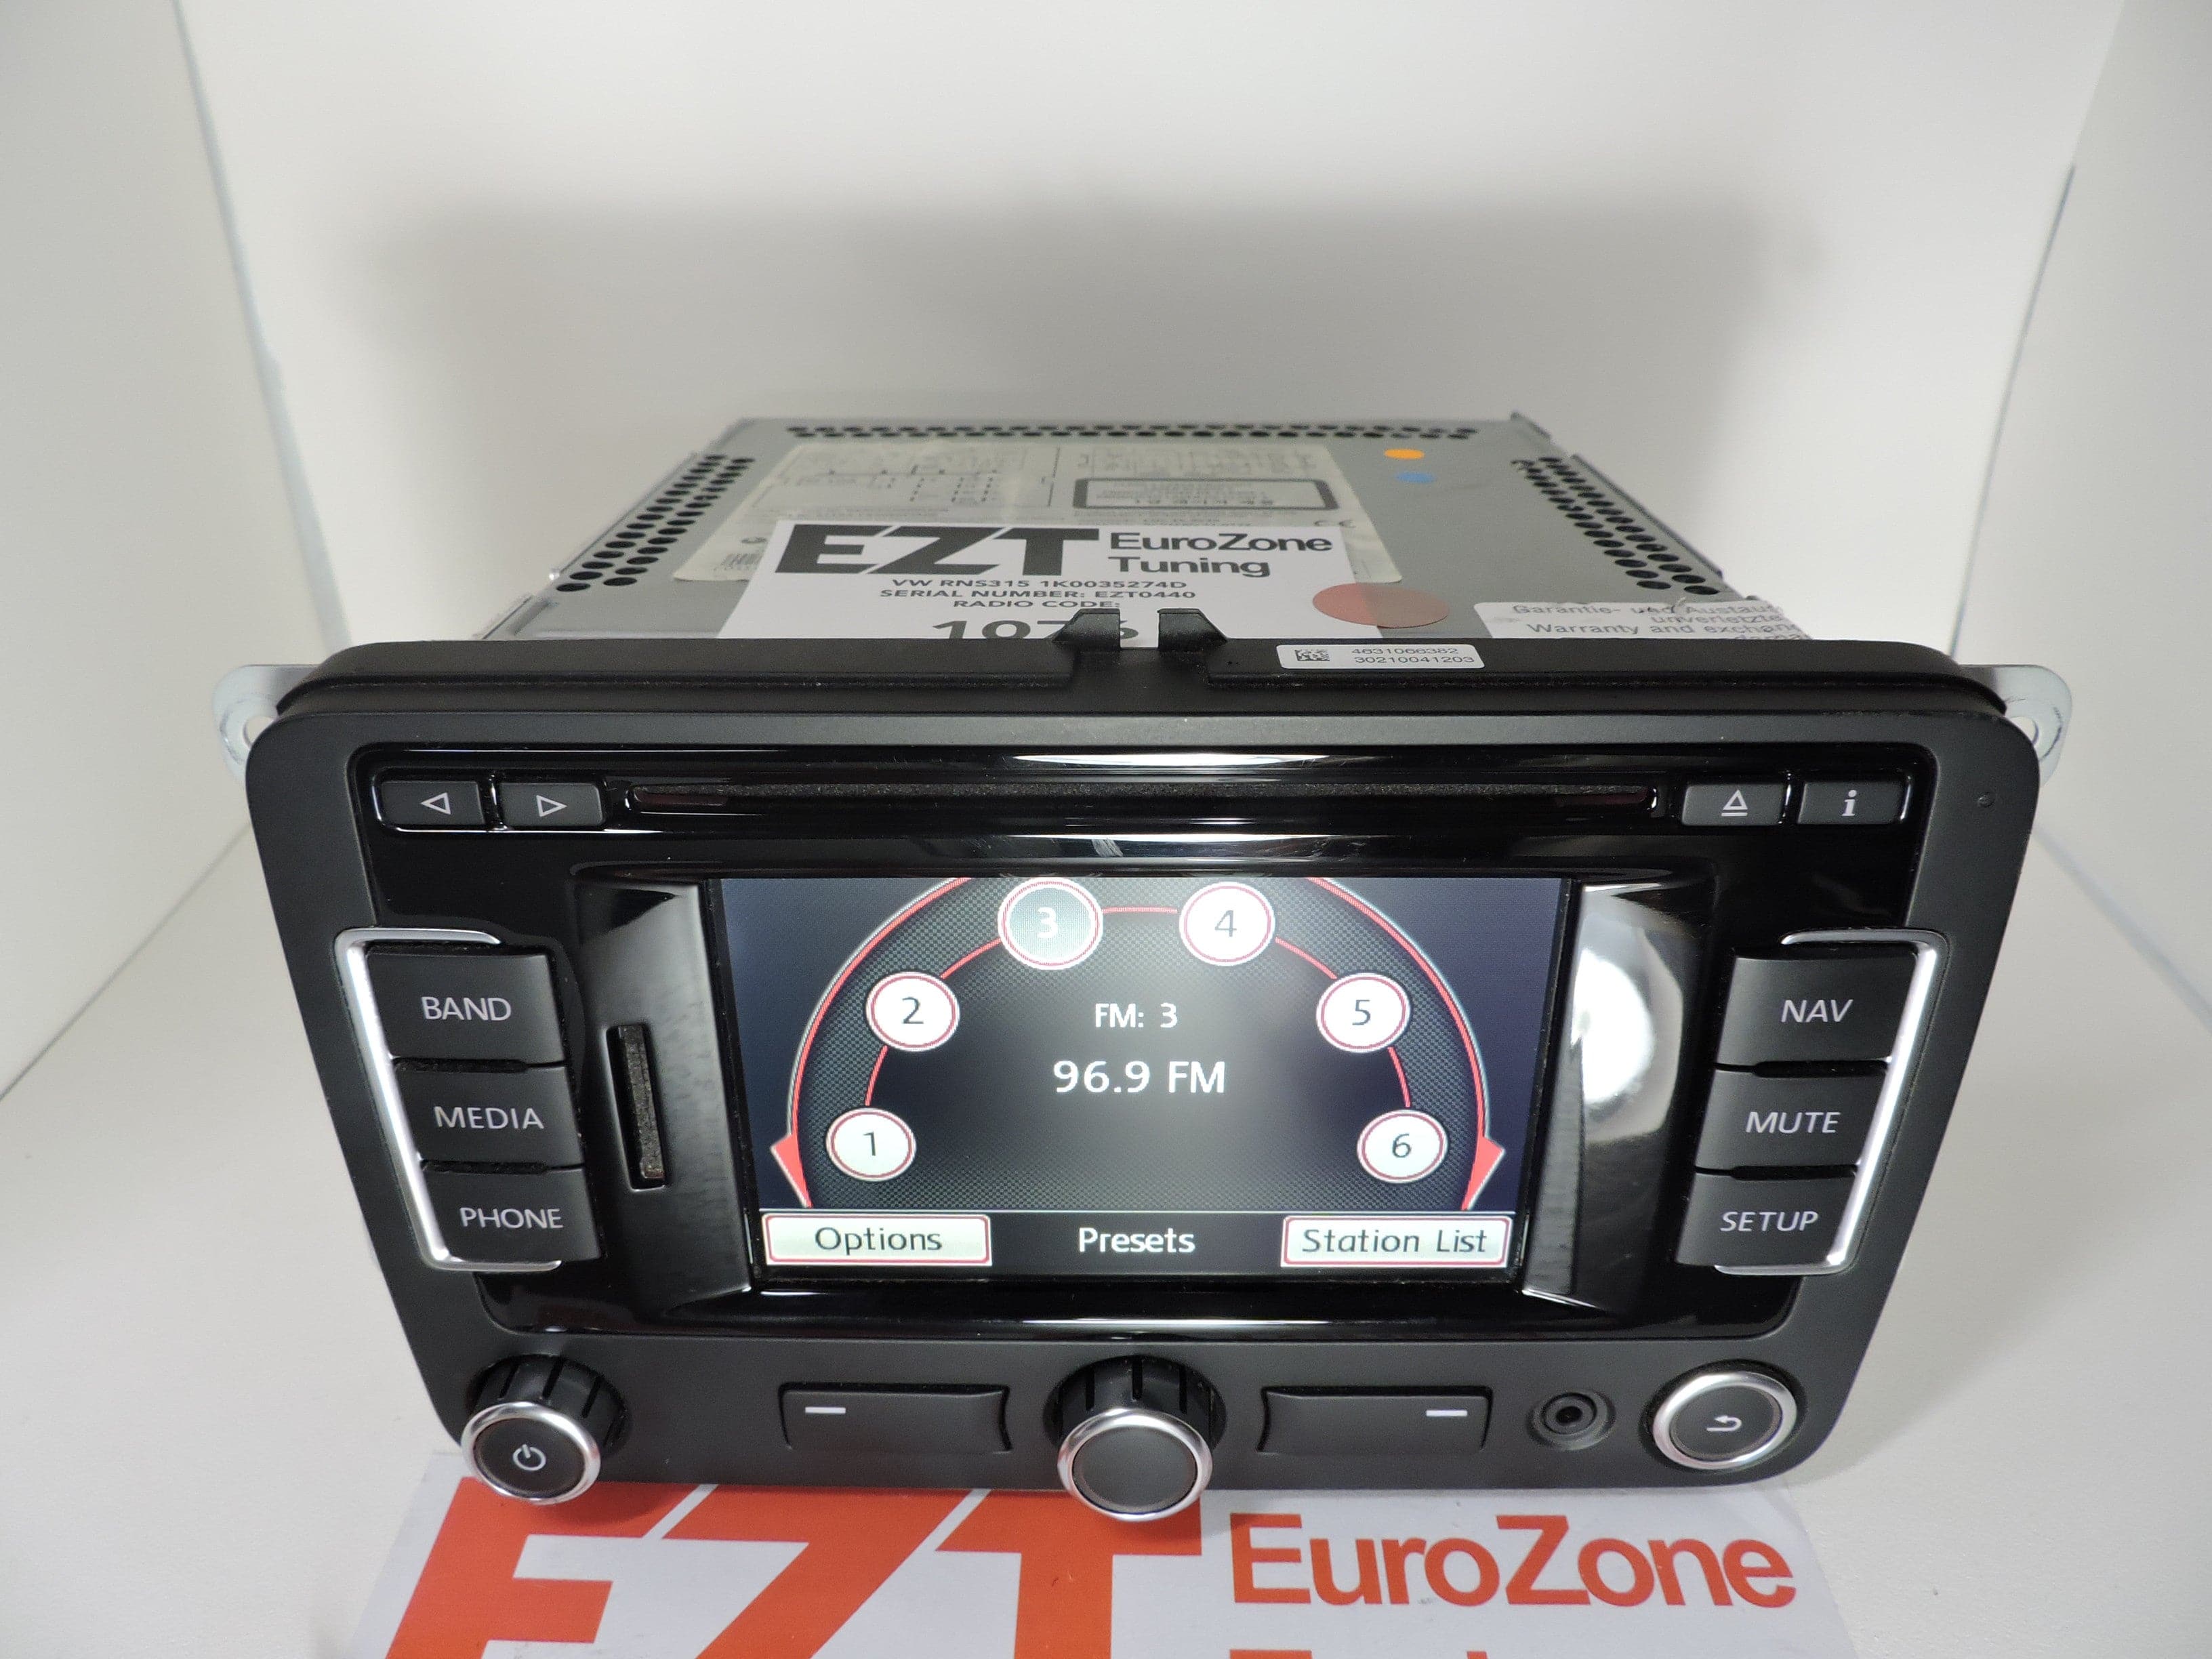 RNS315 Navigation System Overview – Eurozone Tuning